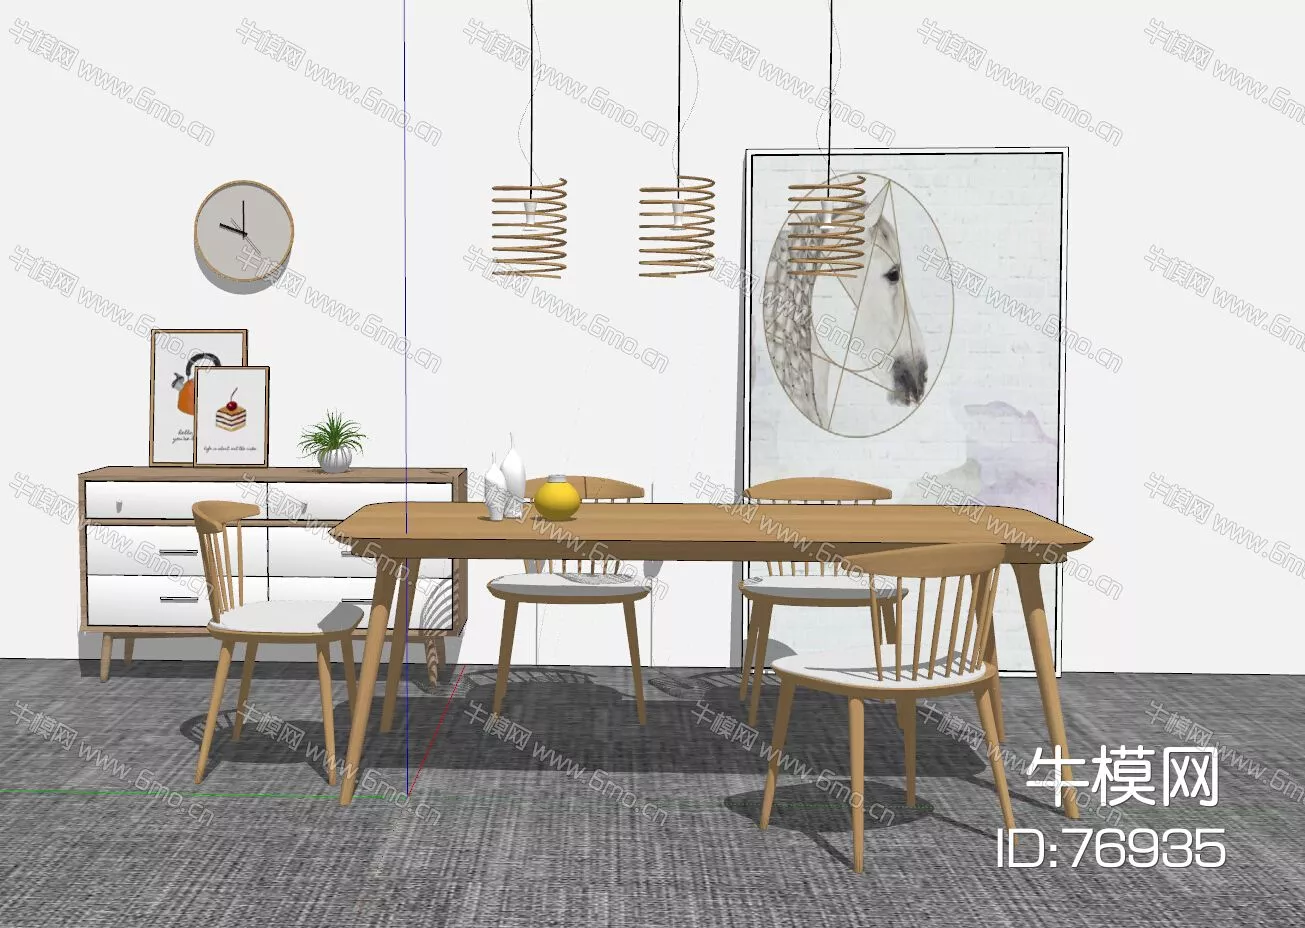 NORDIC DINING TABLE SET - SKETCHUP 3D MODEL - VRAY - 76935